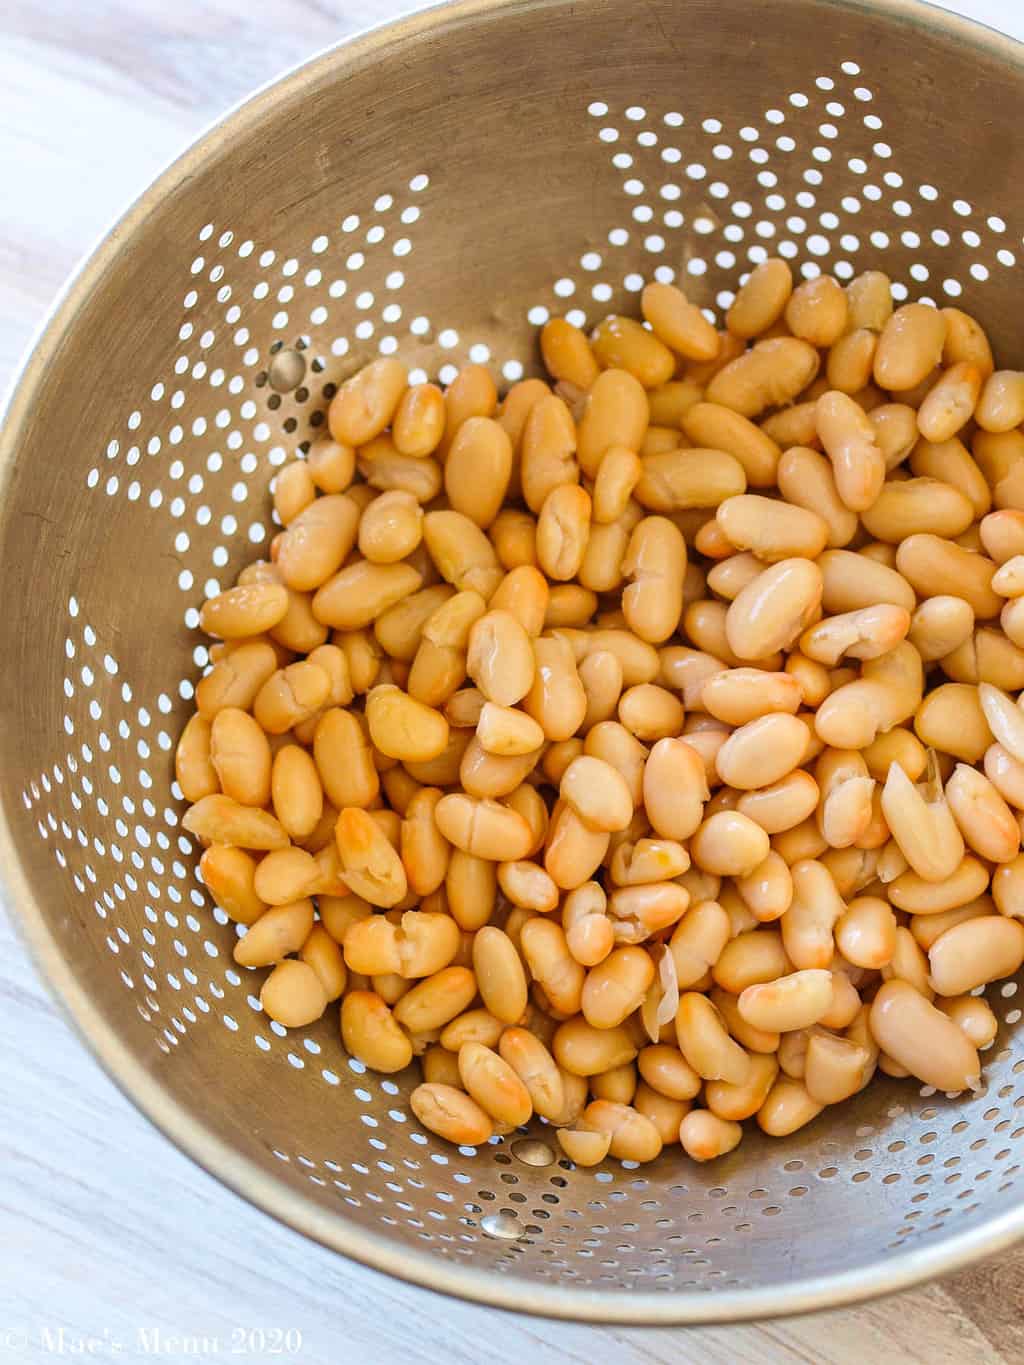 A metal strainer of white beans